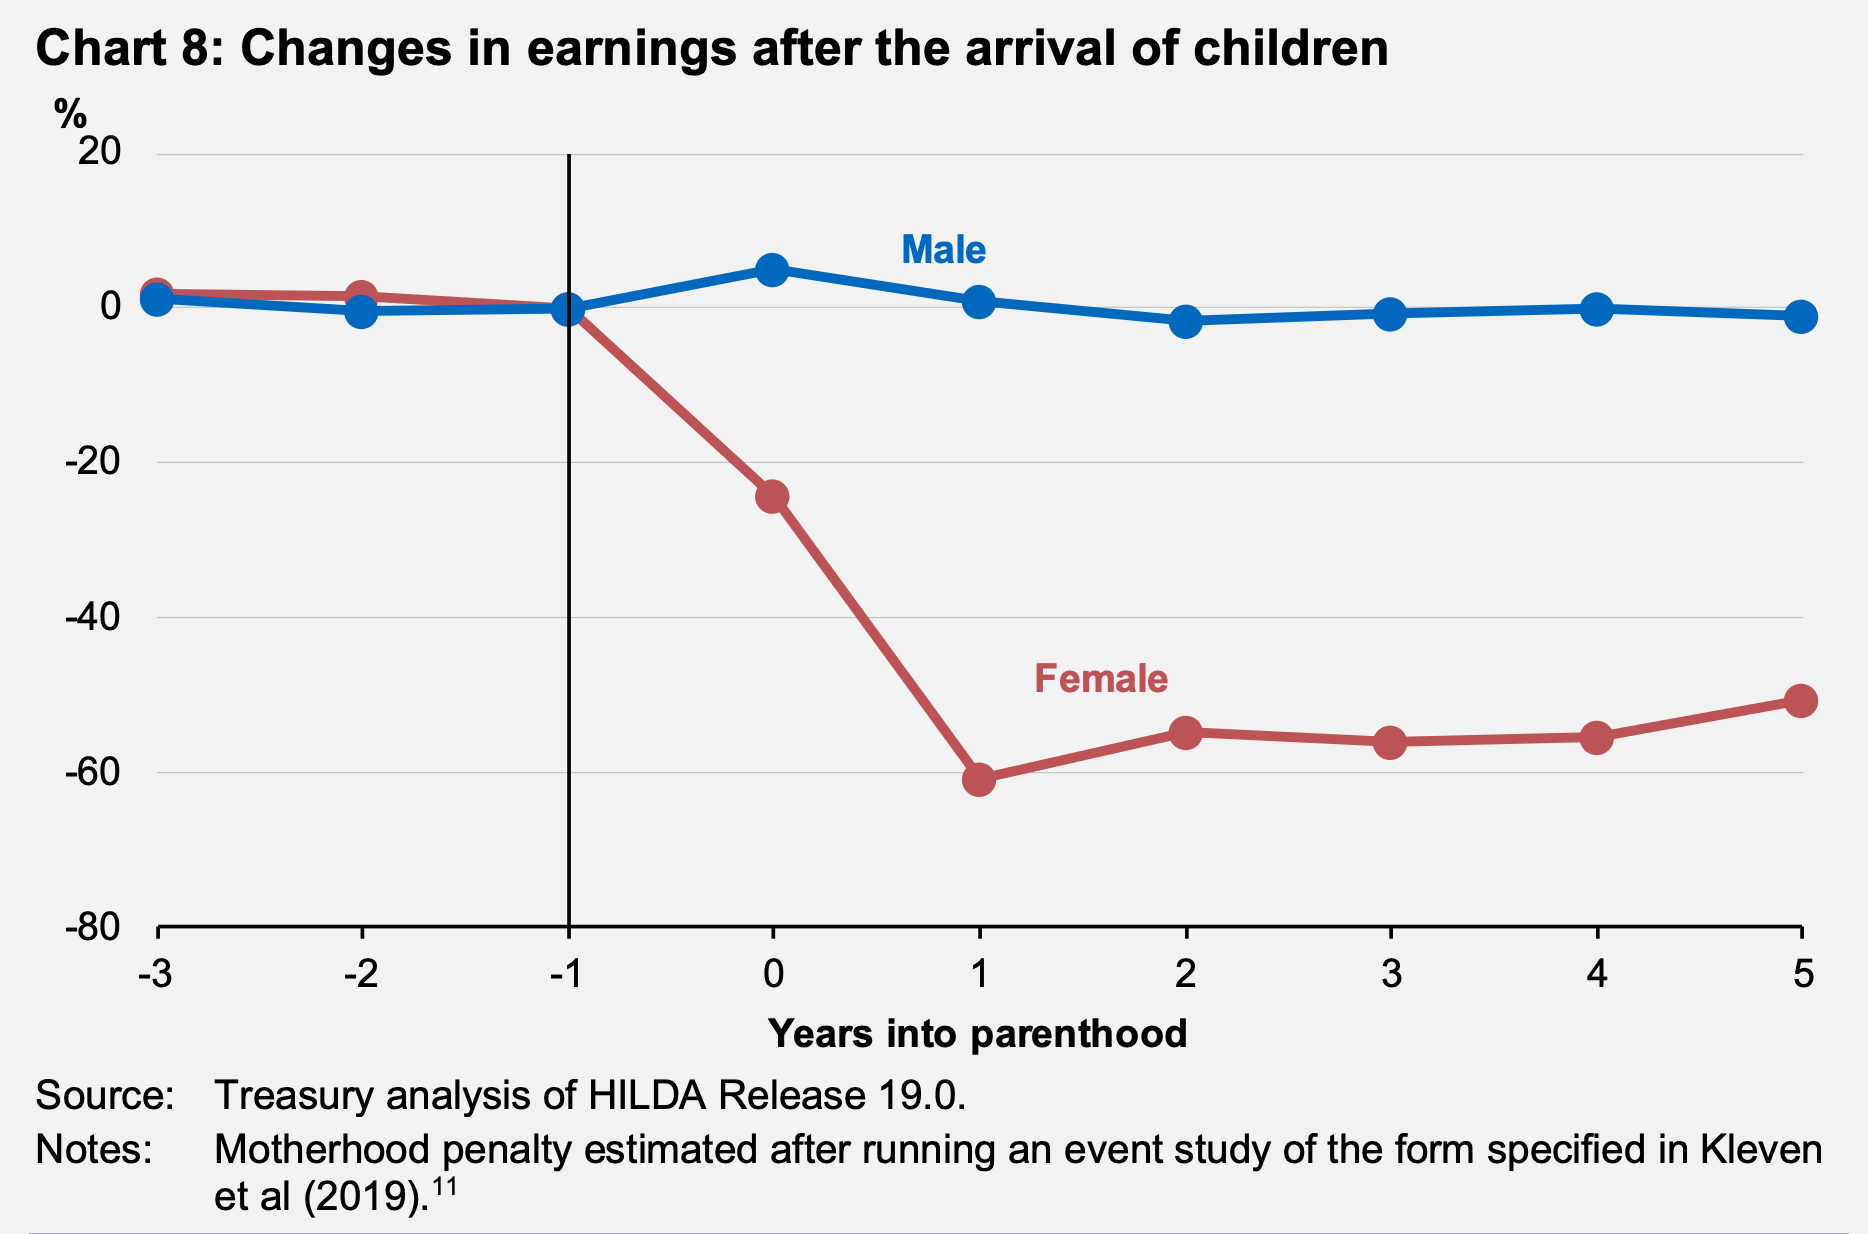 A line graph showing changes in earnings, by sex, after the arrival of children